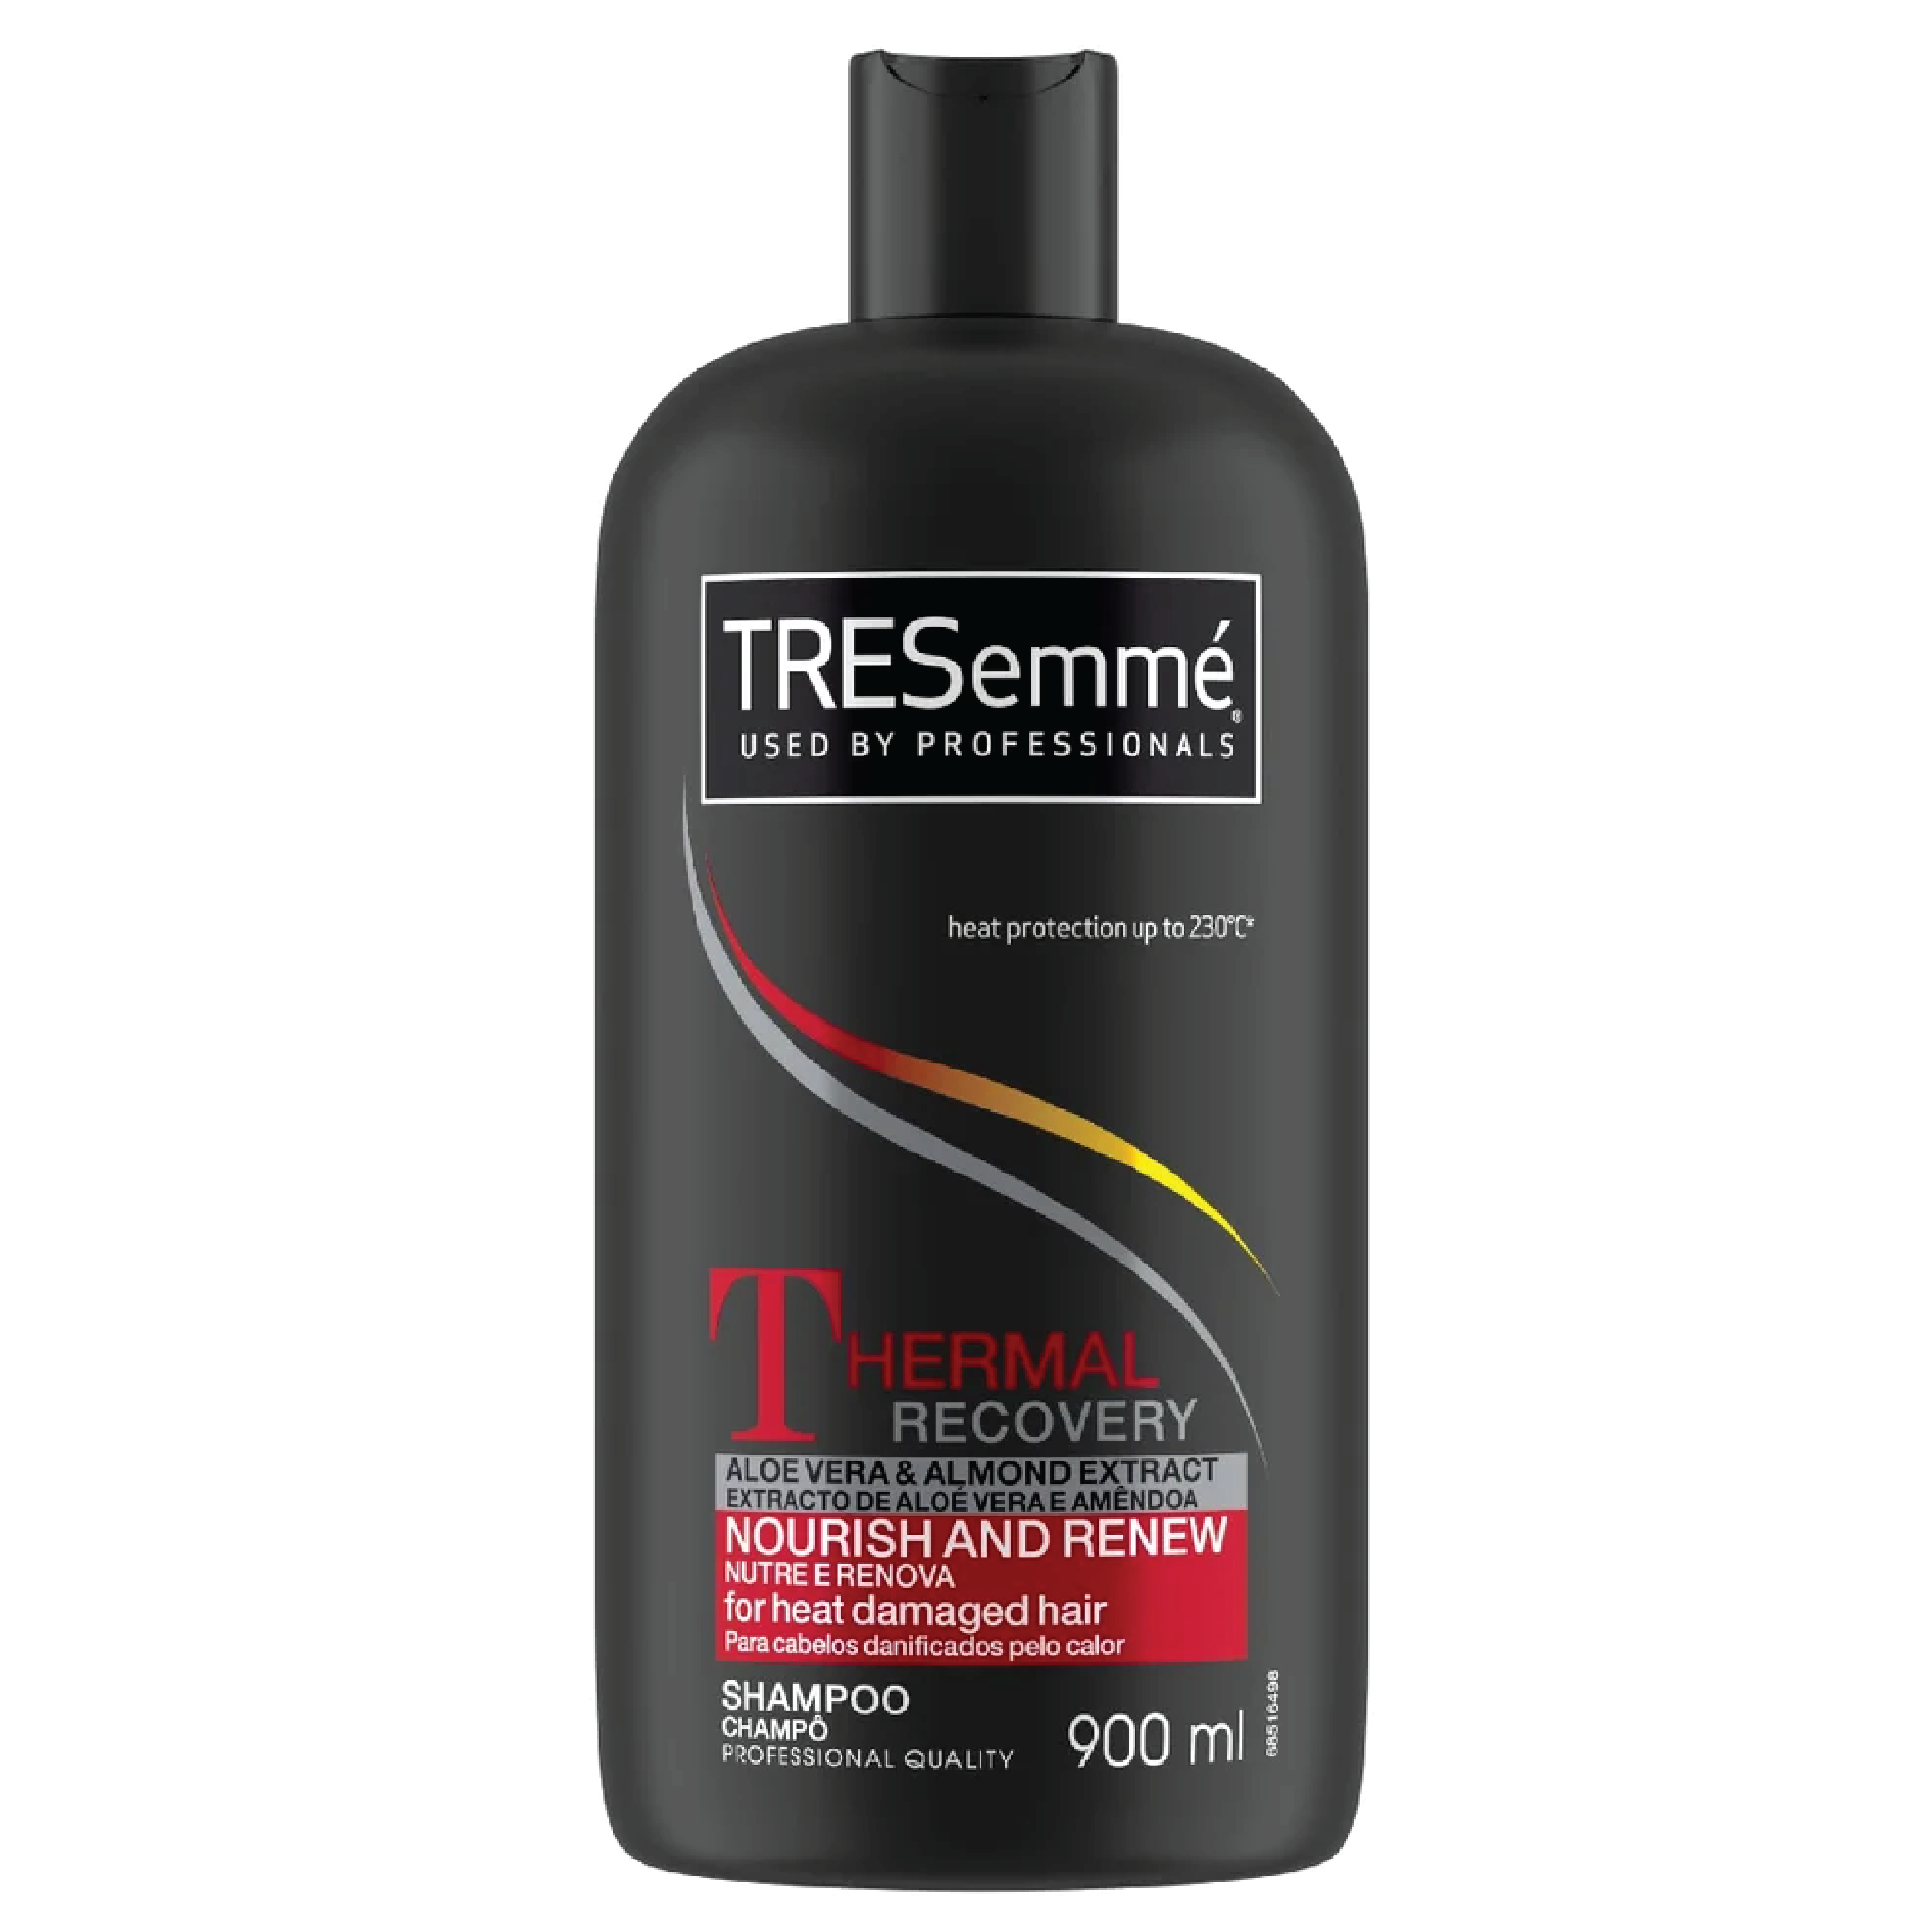 TreSemme' Thermal Recovery Shampoo 900ml